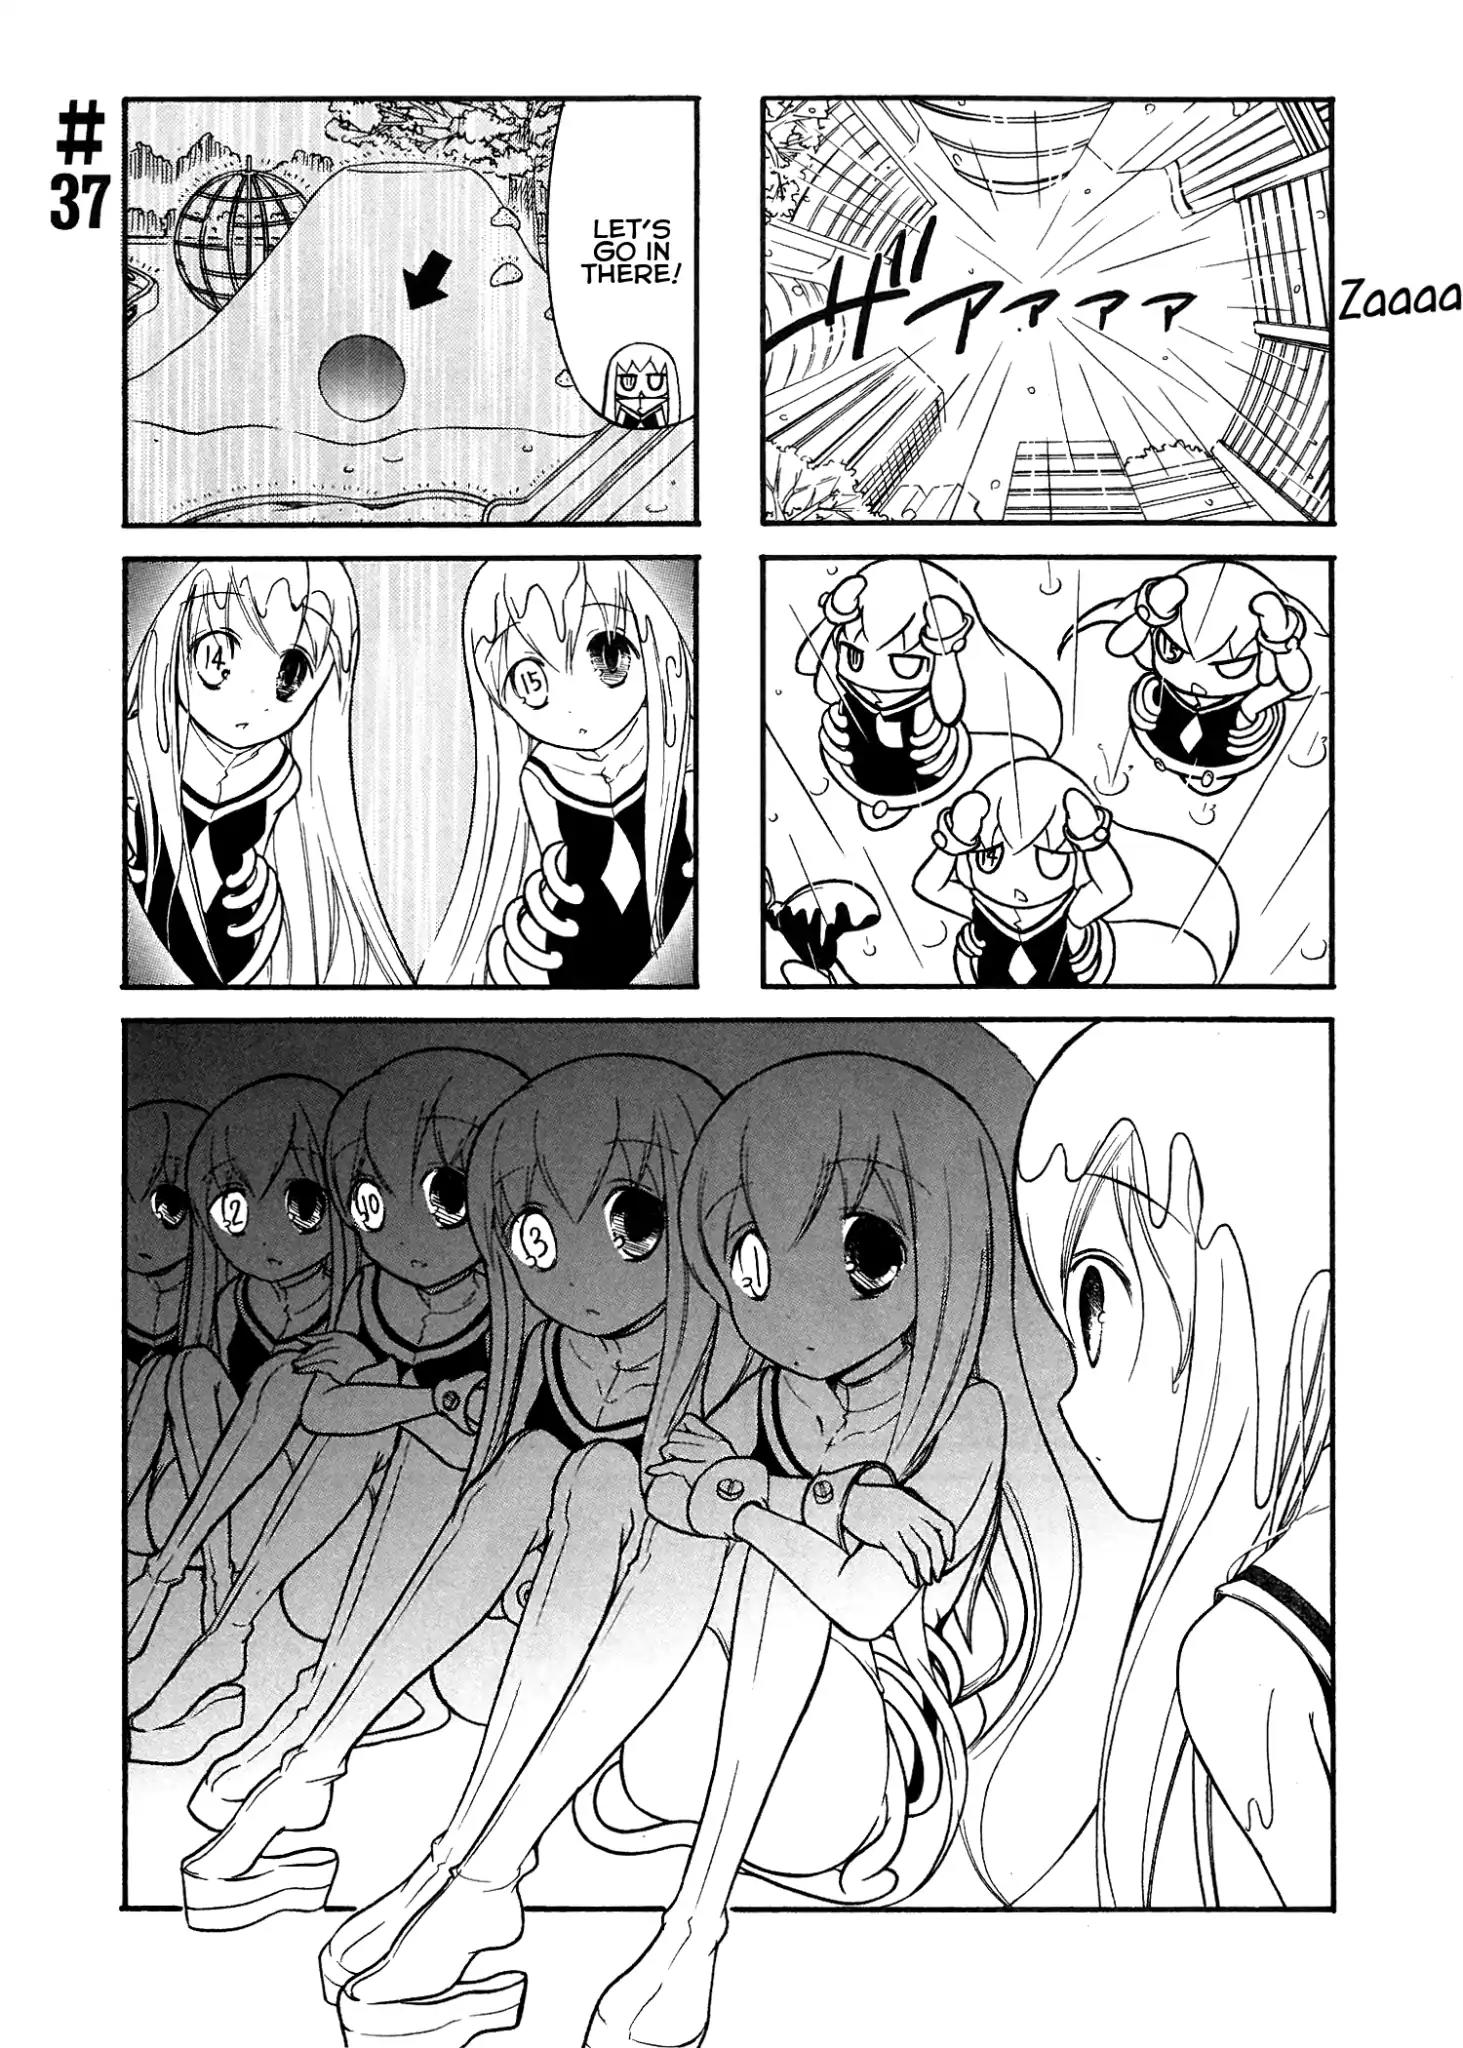 Number Girl Vol.3 Chapter 37